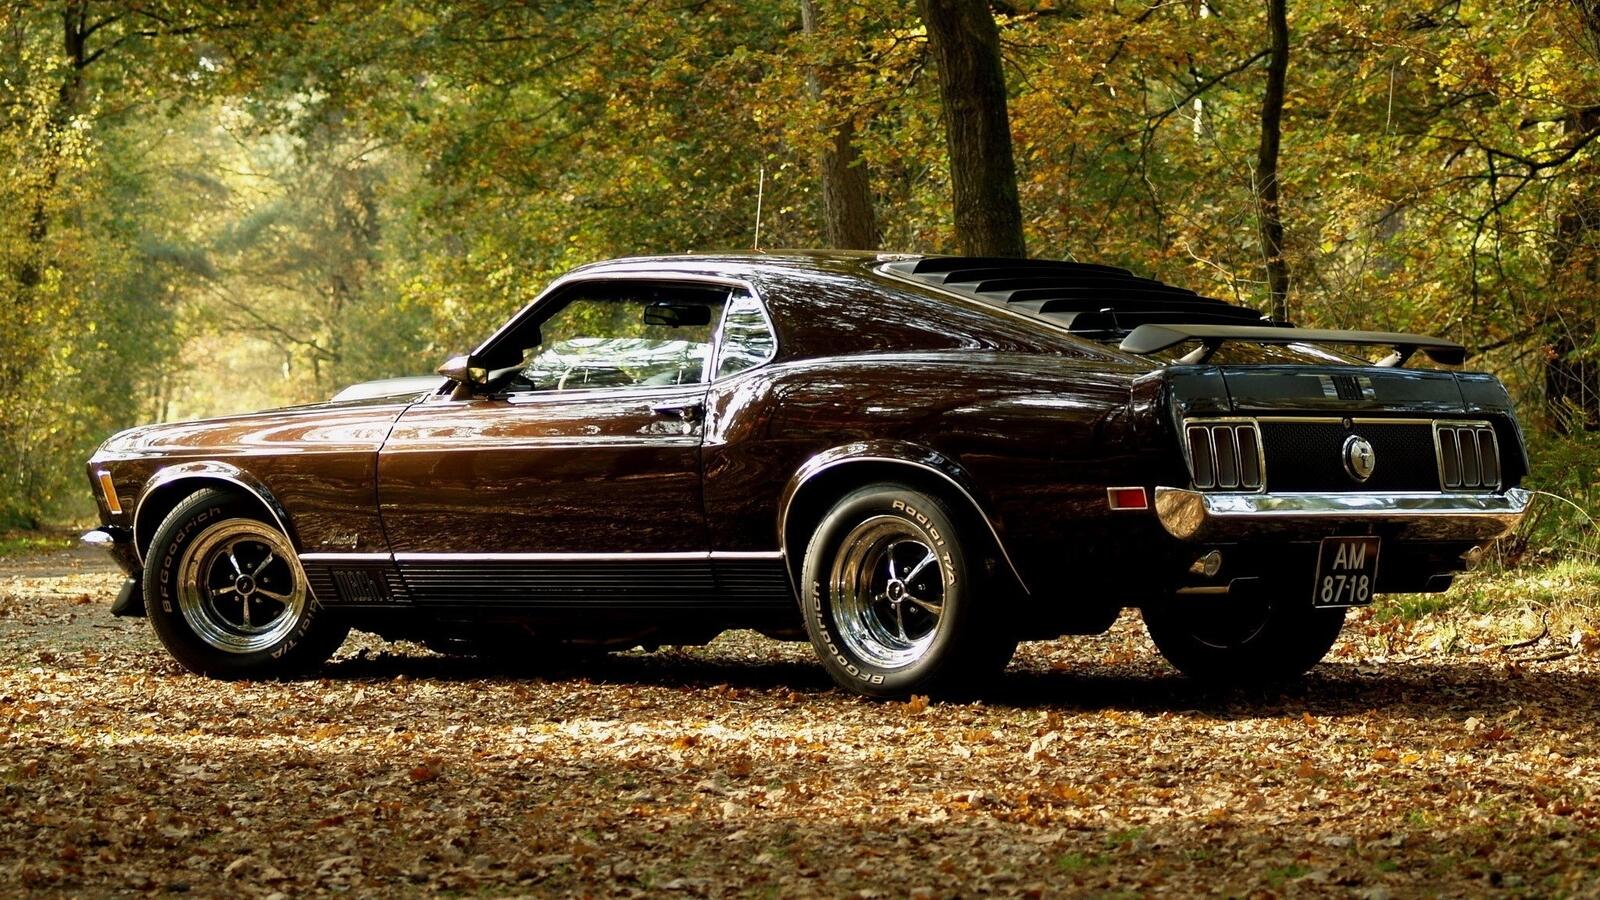 Free photo Ford mustang on the fall leaves.